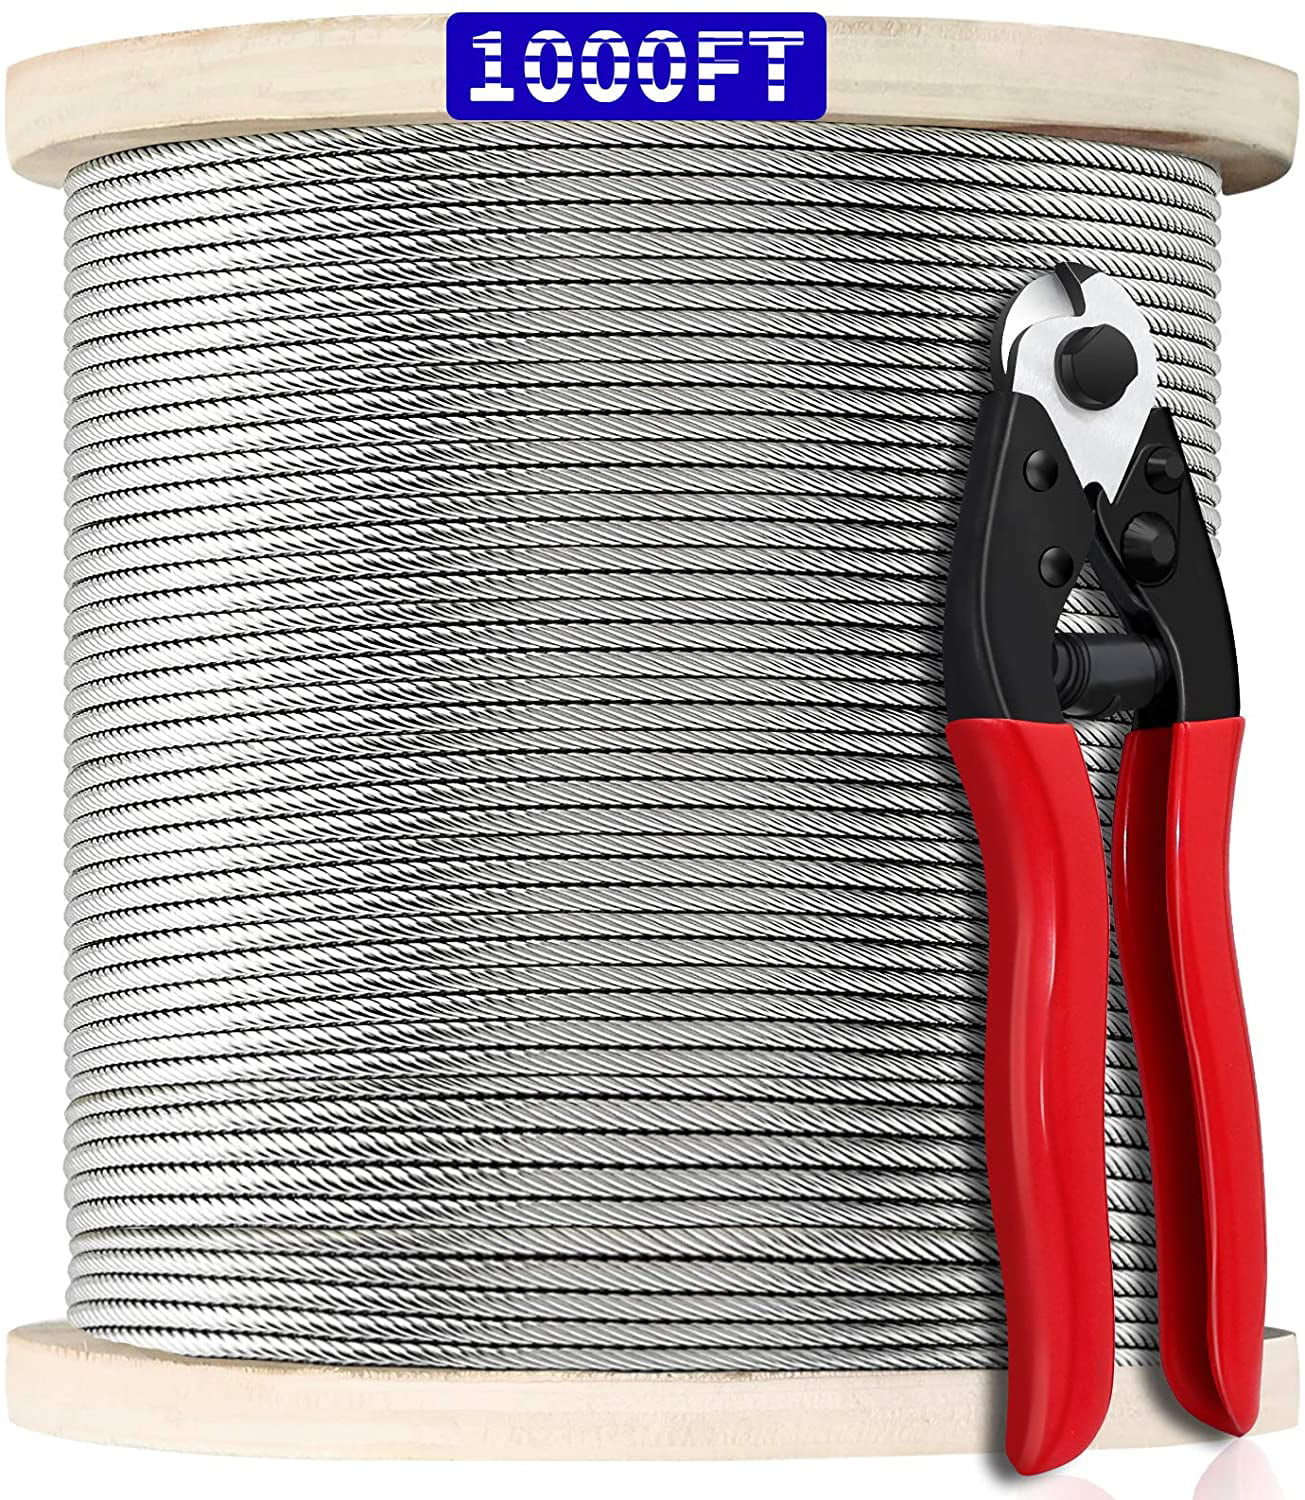 Details about   LuckIn 1/8 inch Aircraft Wire Rope Kit T316 Stainless Steel 7 x 7 Strands Con... 